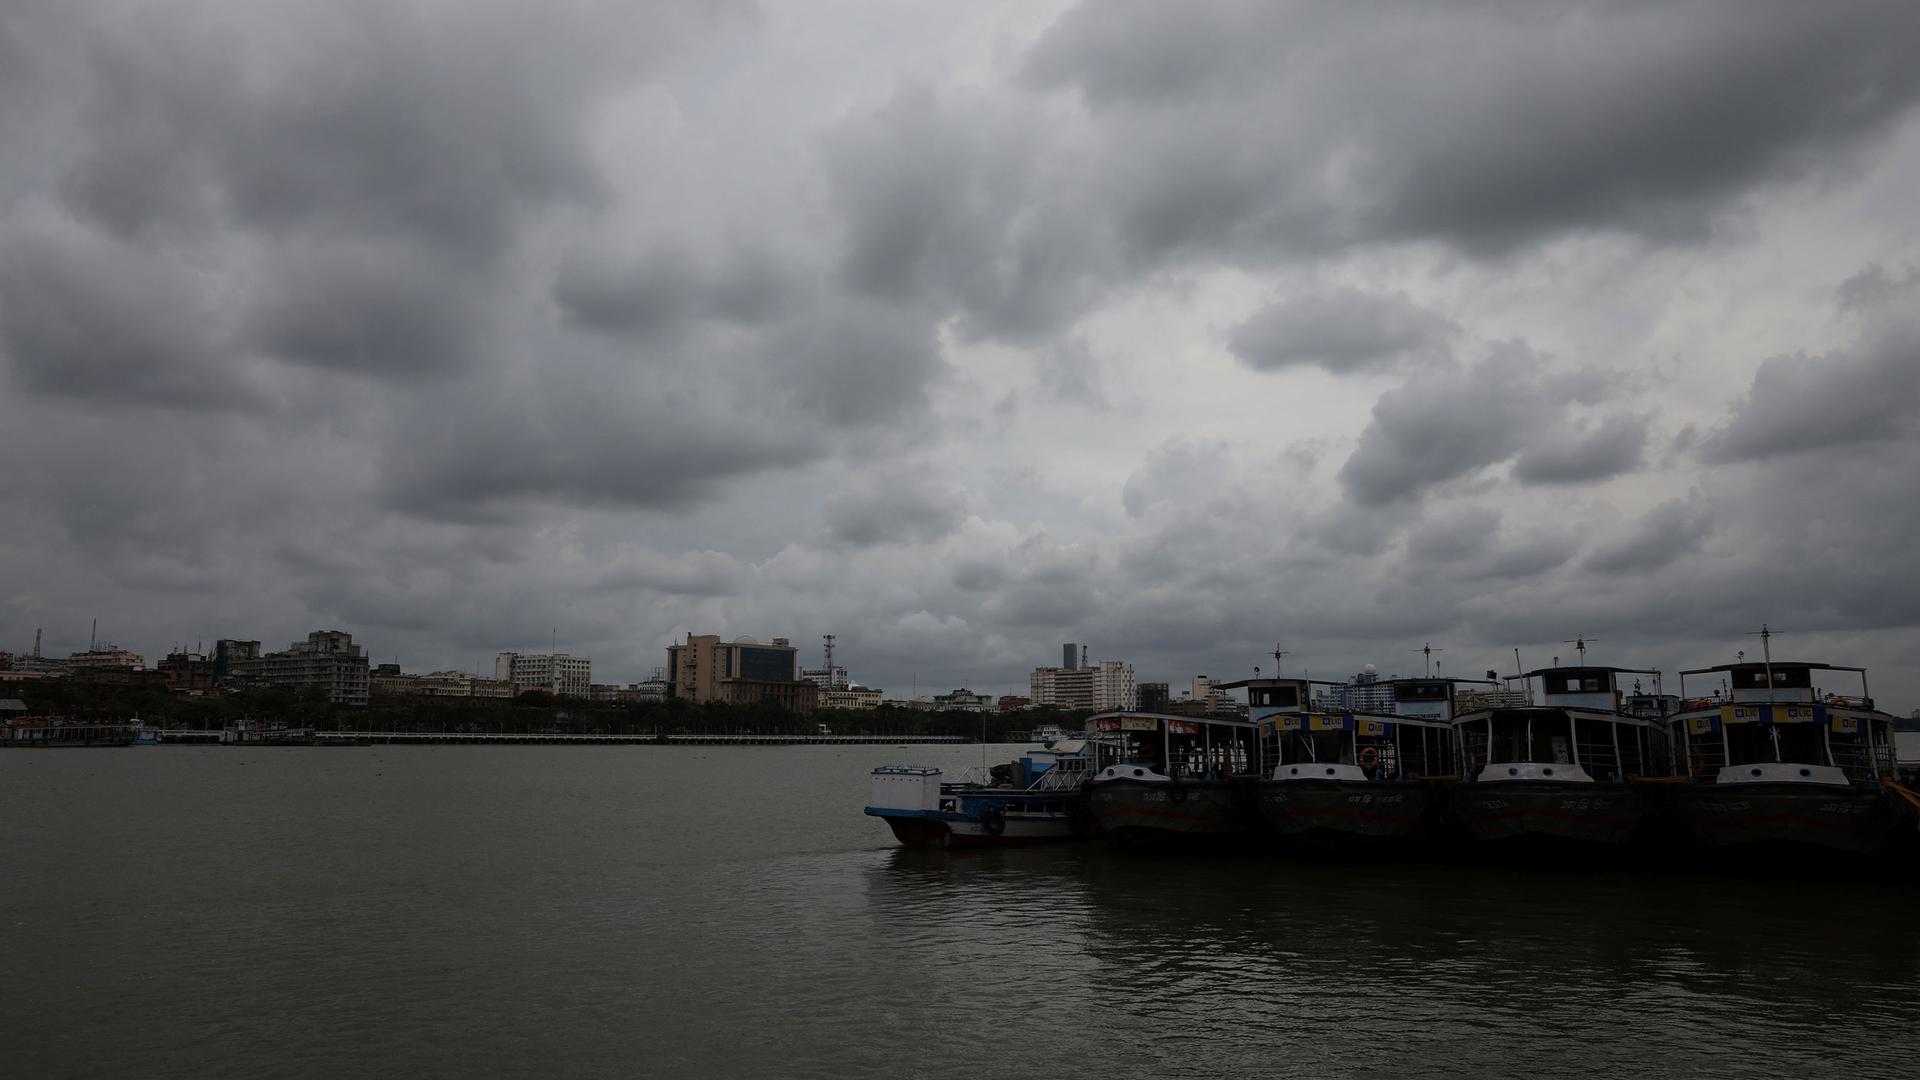 Clouds cover the skies over the river Ganges ahead of Cyclone Amphan, in Kolkata, India, May 19, 2020.